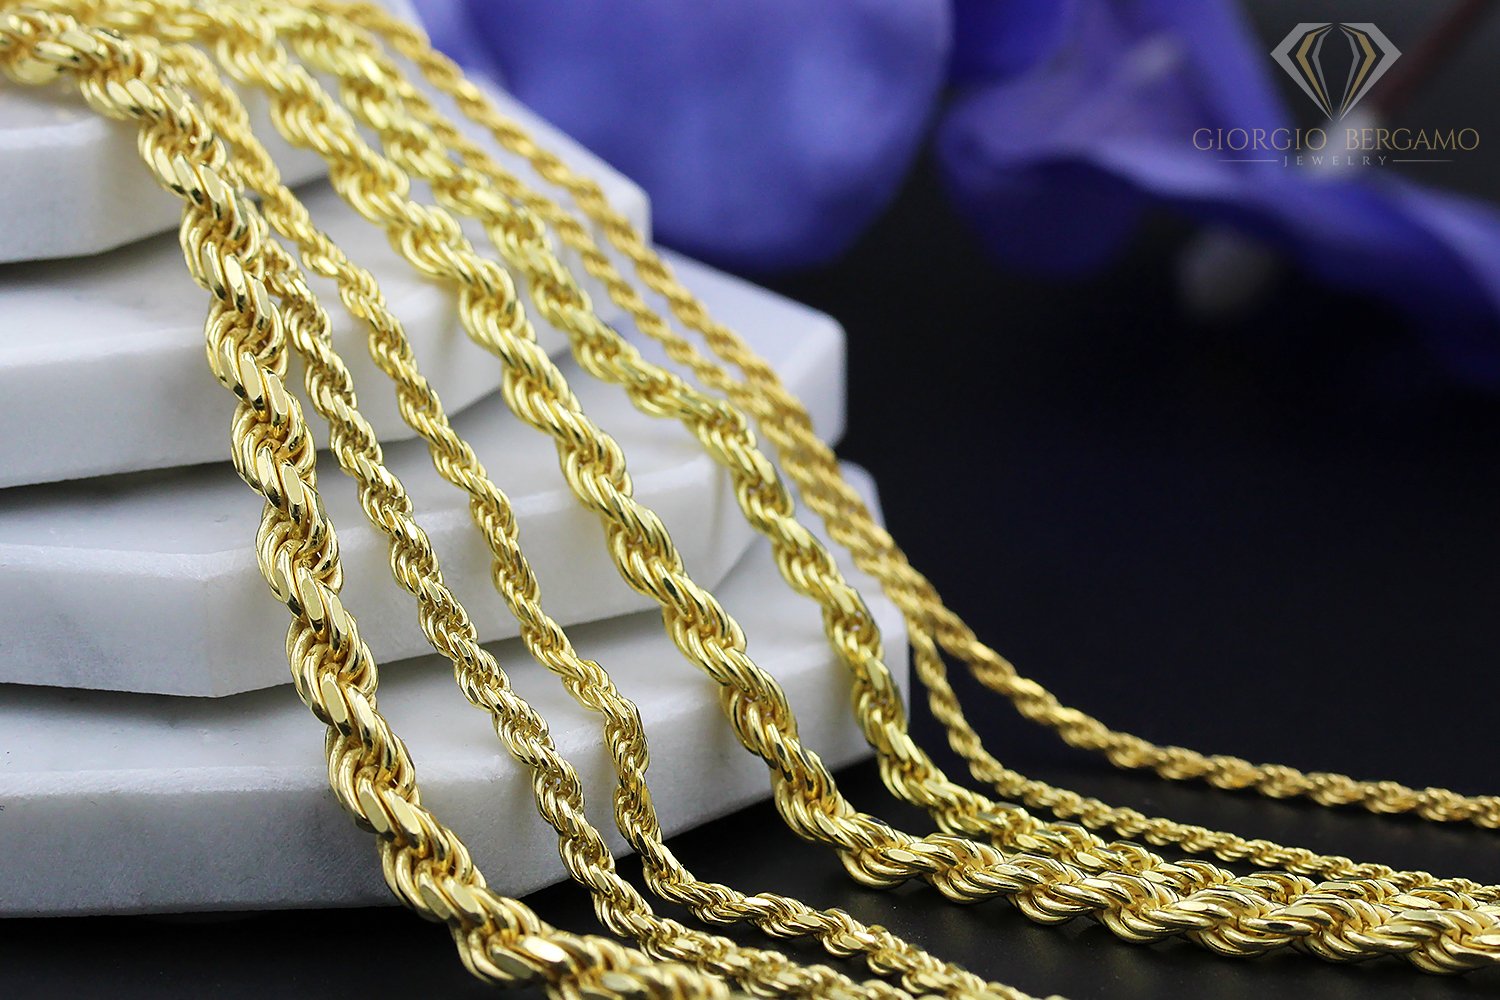 14K Yellow Gold 1mm Solid Rope Diamond Cut Chain